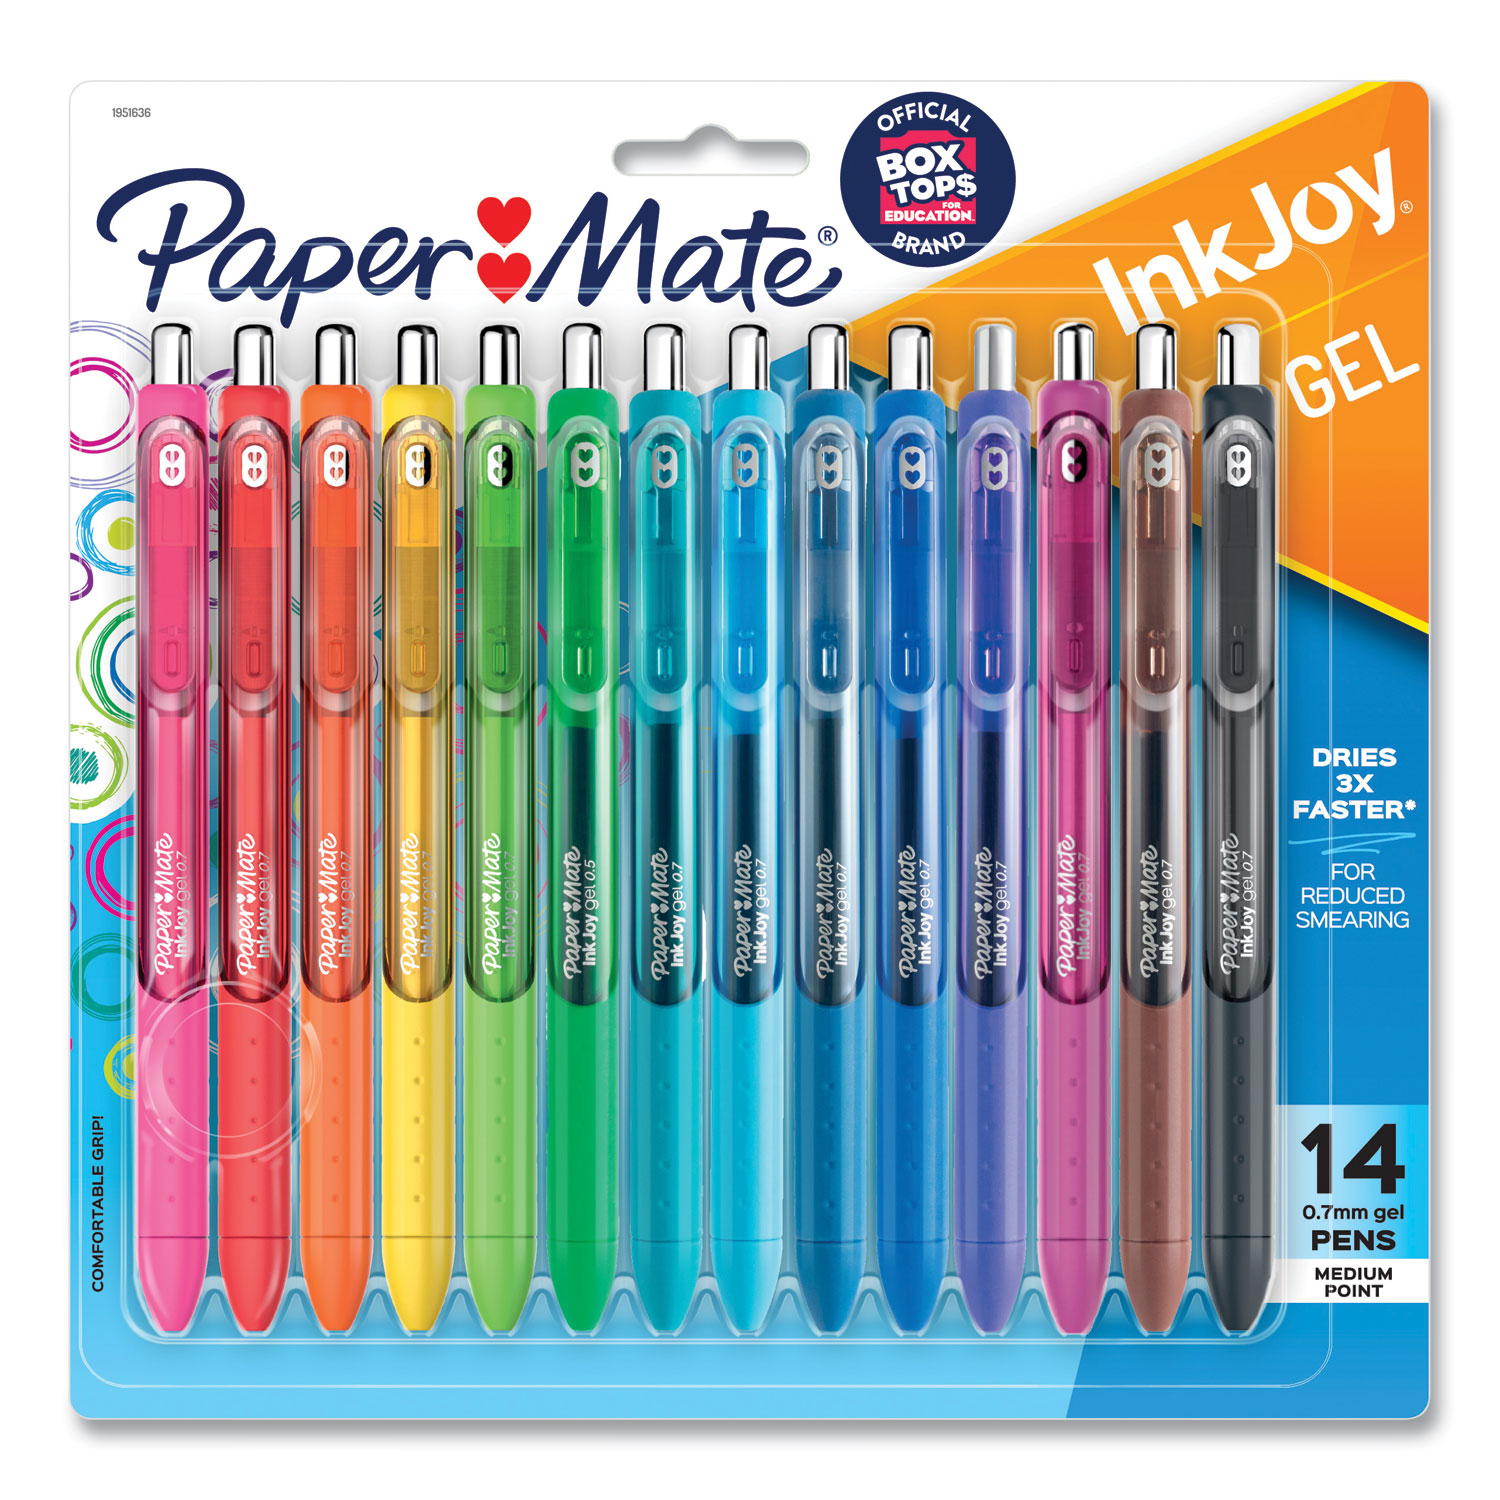 InkJoy Gel Pen, Medium 0.7 Assorted and Barrel Colors, 14/Pack - JCL Solutions / Spencer Office Supplies